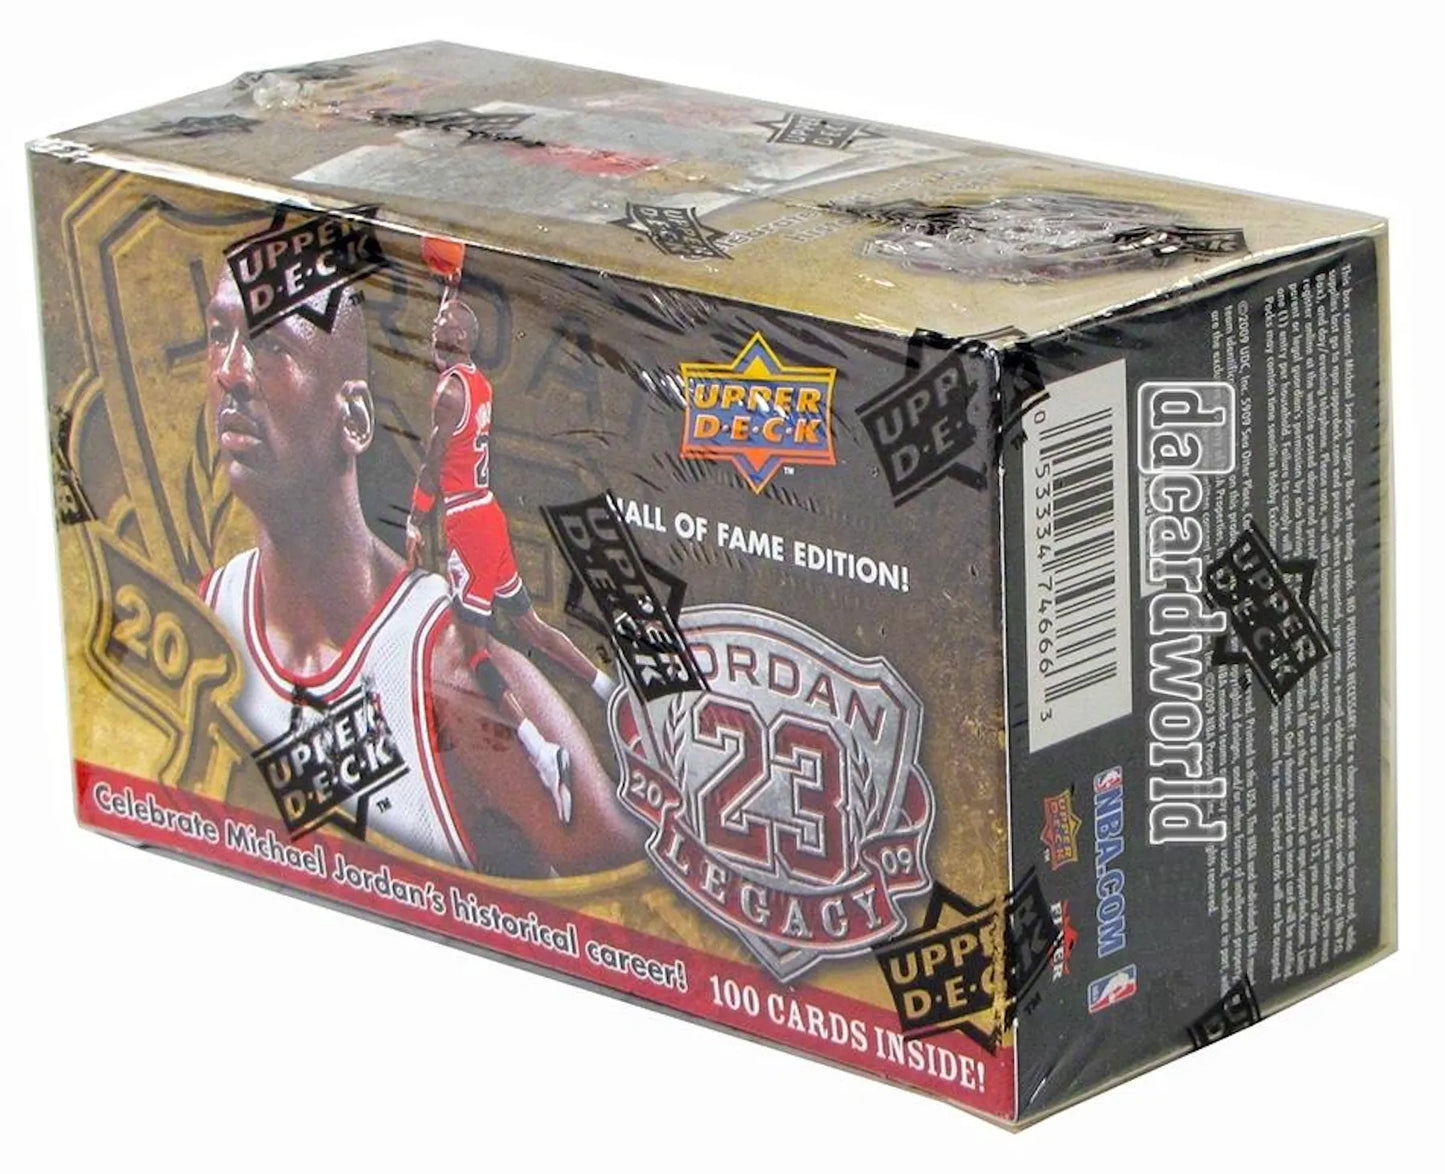 2009/10 Upper Deck Basketball Michael Jordan Legacy Hall of Fame Edition Factory Set (Extremely Rare!)